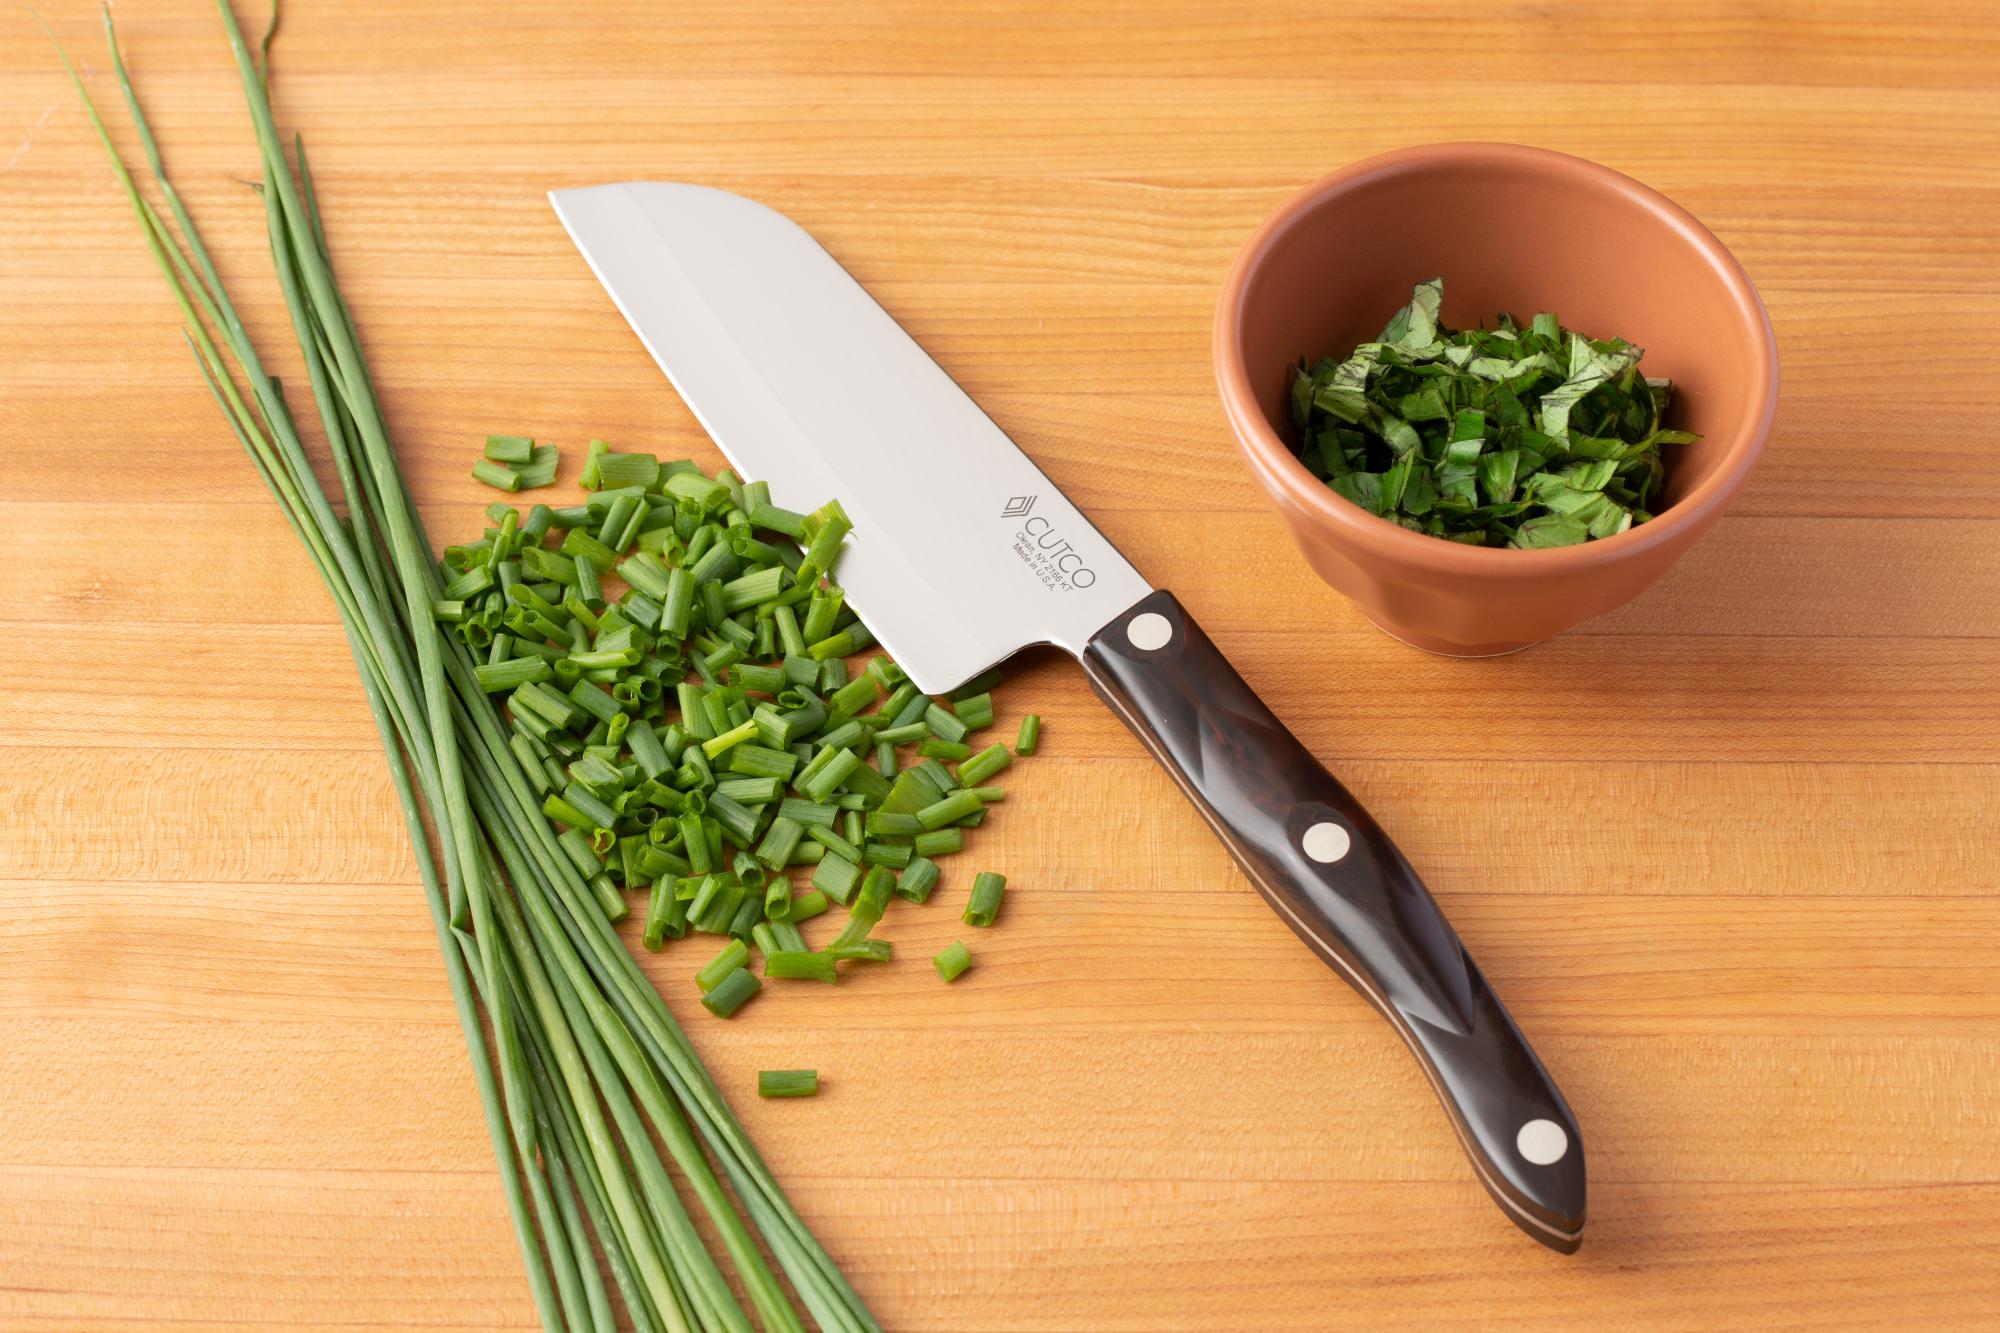 Use a Petite Santoku to roughly chop the chives and mint.